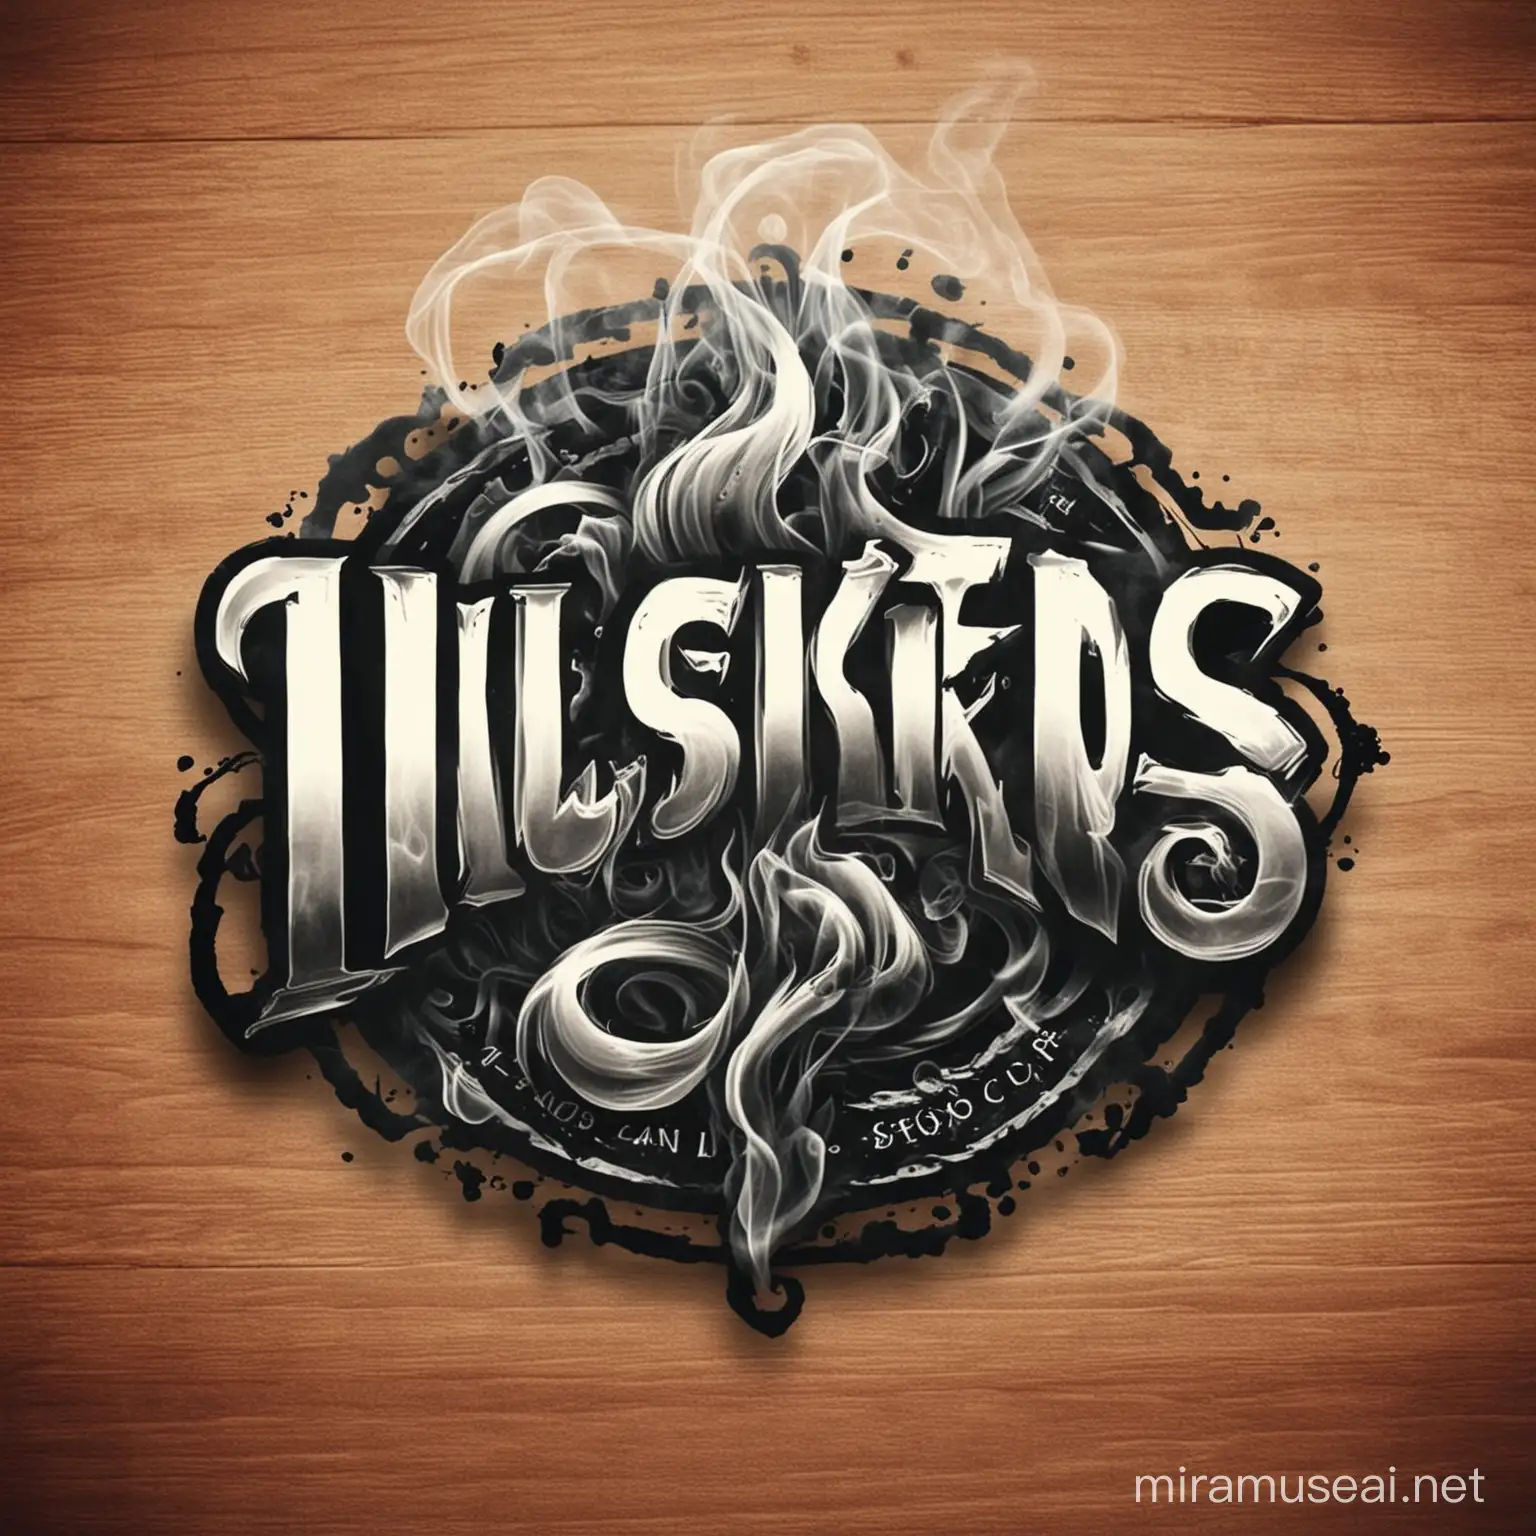 Create a logo using this name as a concept Illusions Smoke Shop make sure the name Illusions Smoke Shop is in the logi